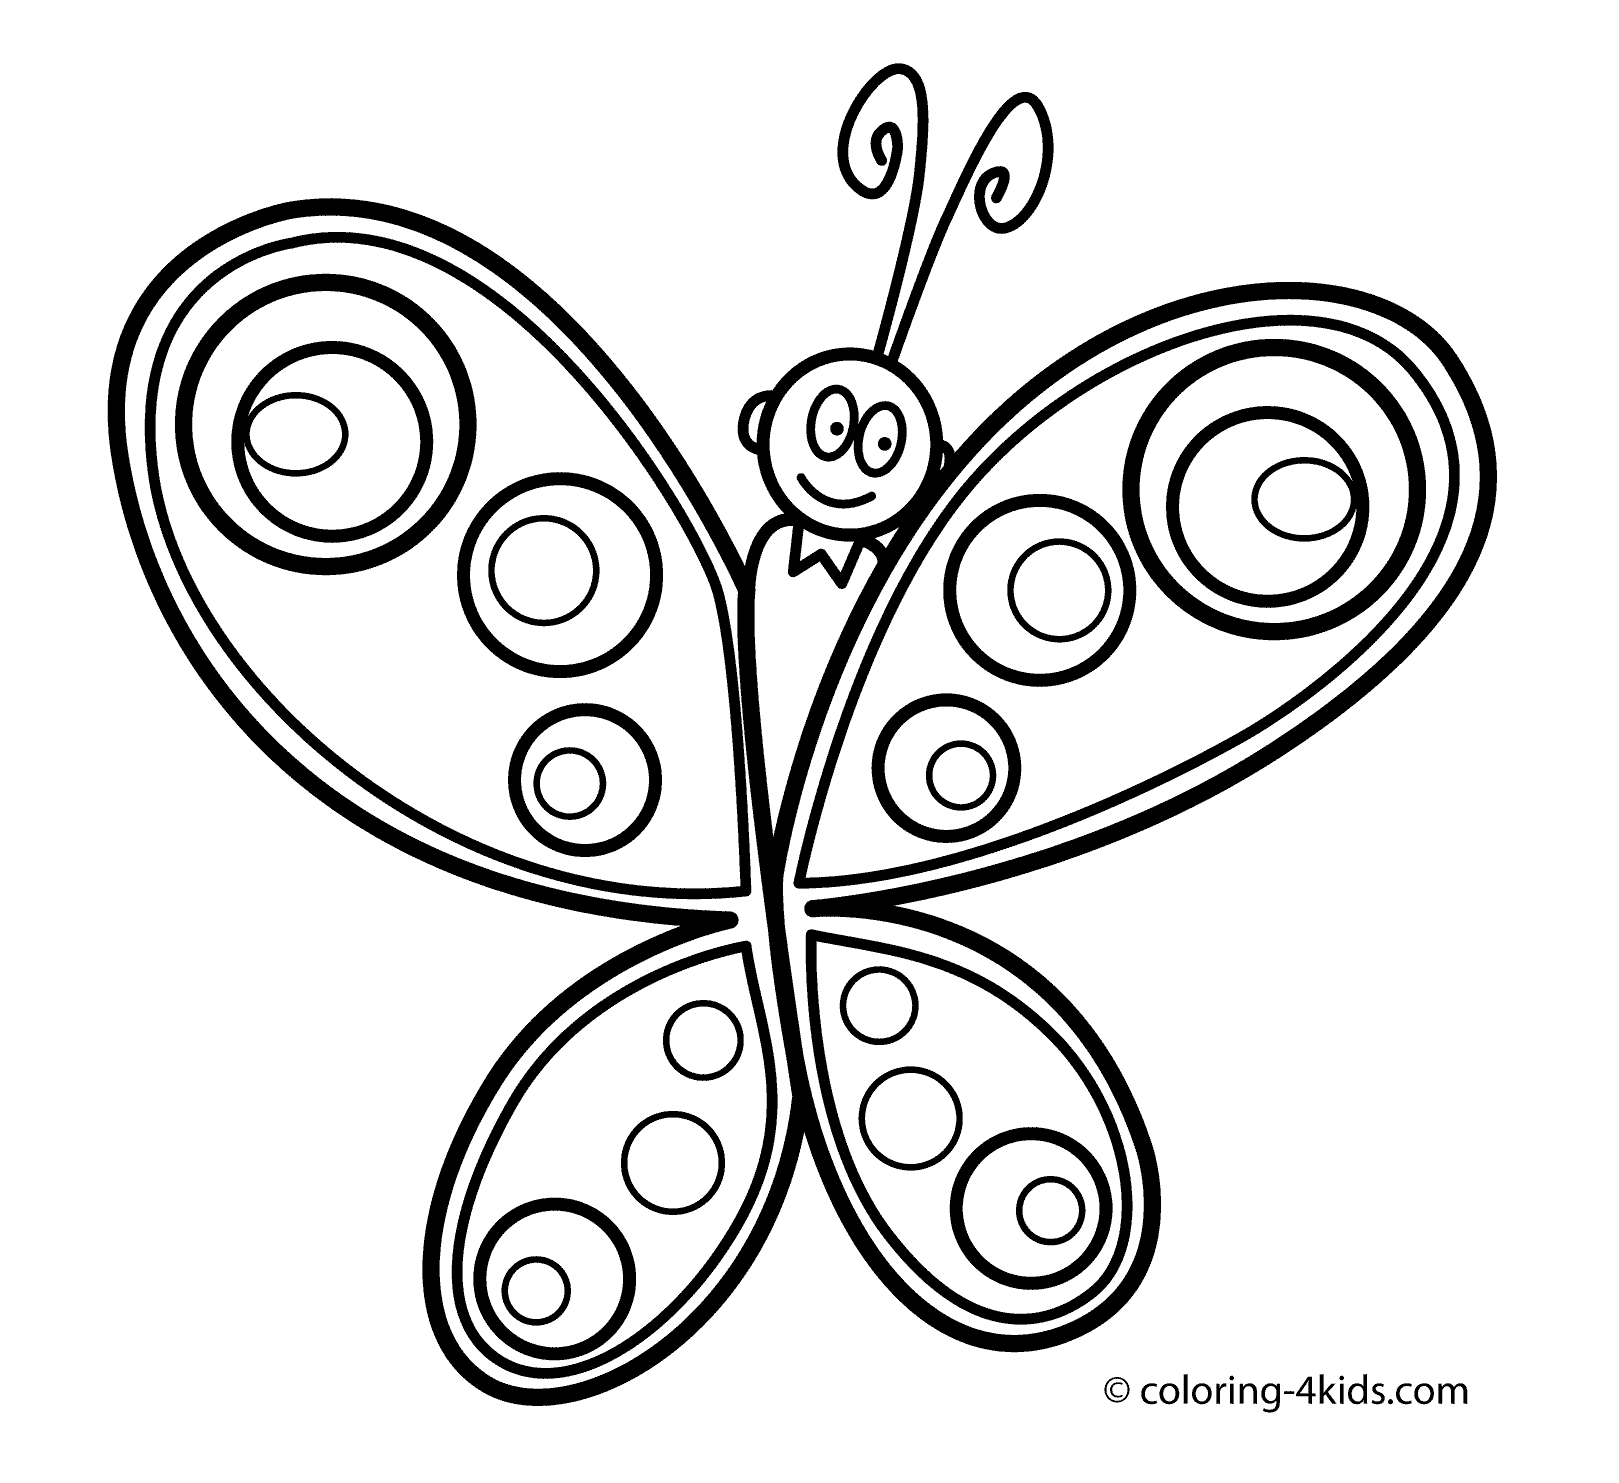 Butterfly coloring pages simple for kids, printable free | coloing 